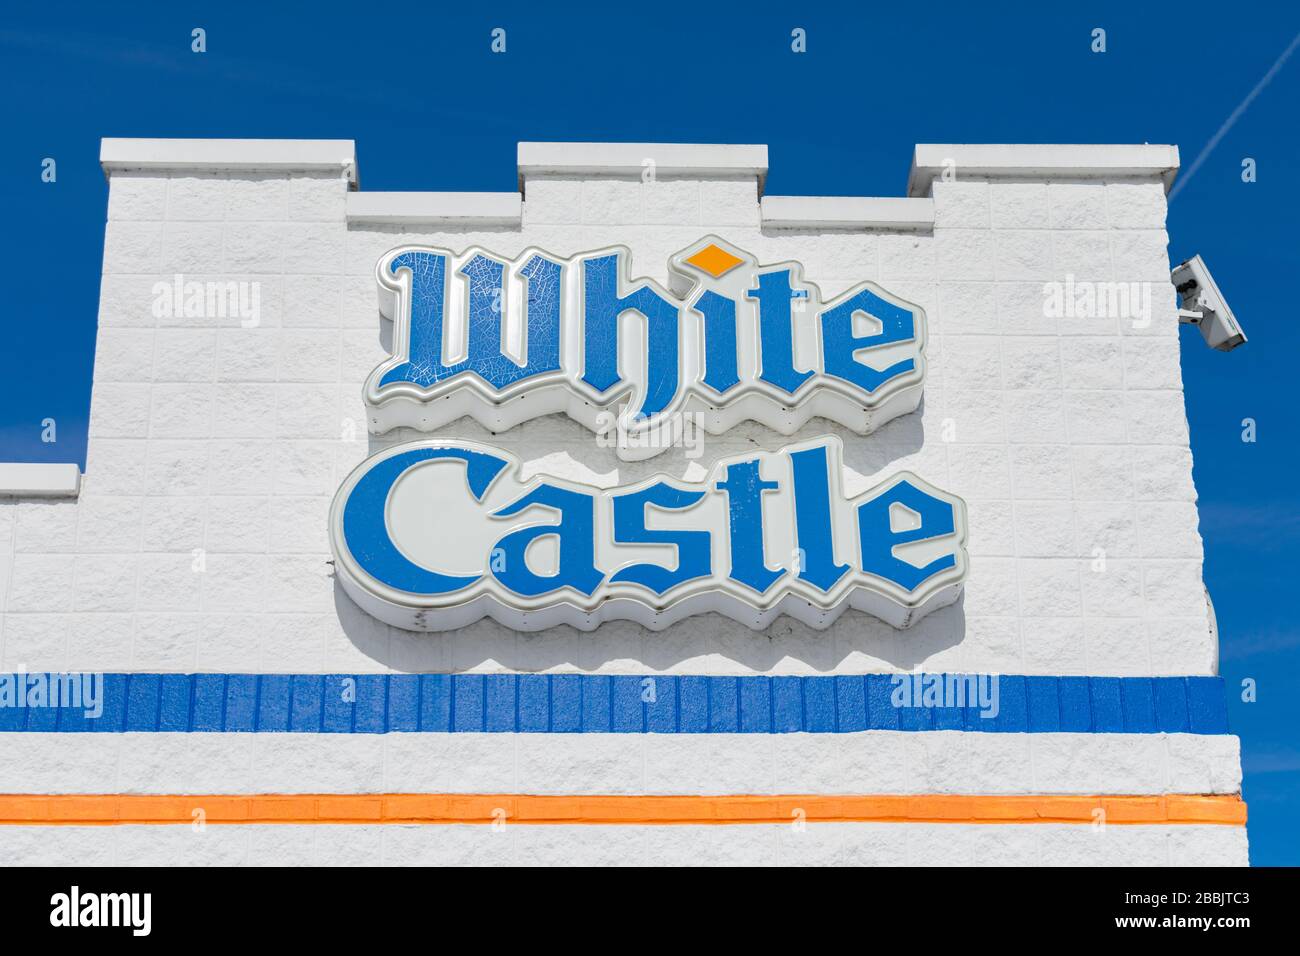 Exterior Building Sign of a White Castle Restaurant Stock Photo